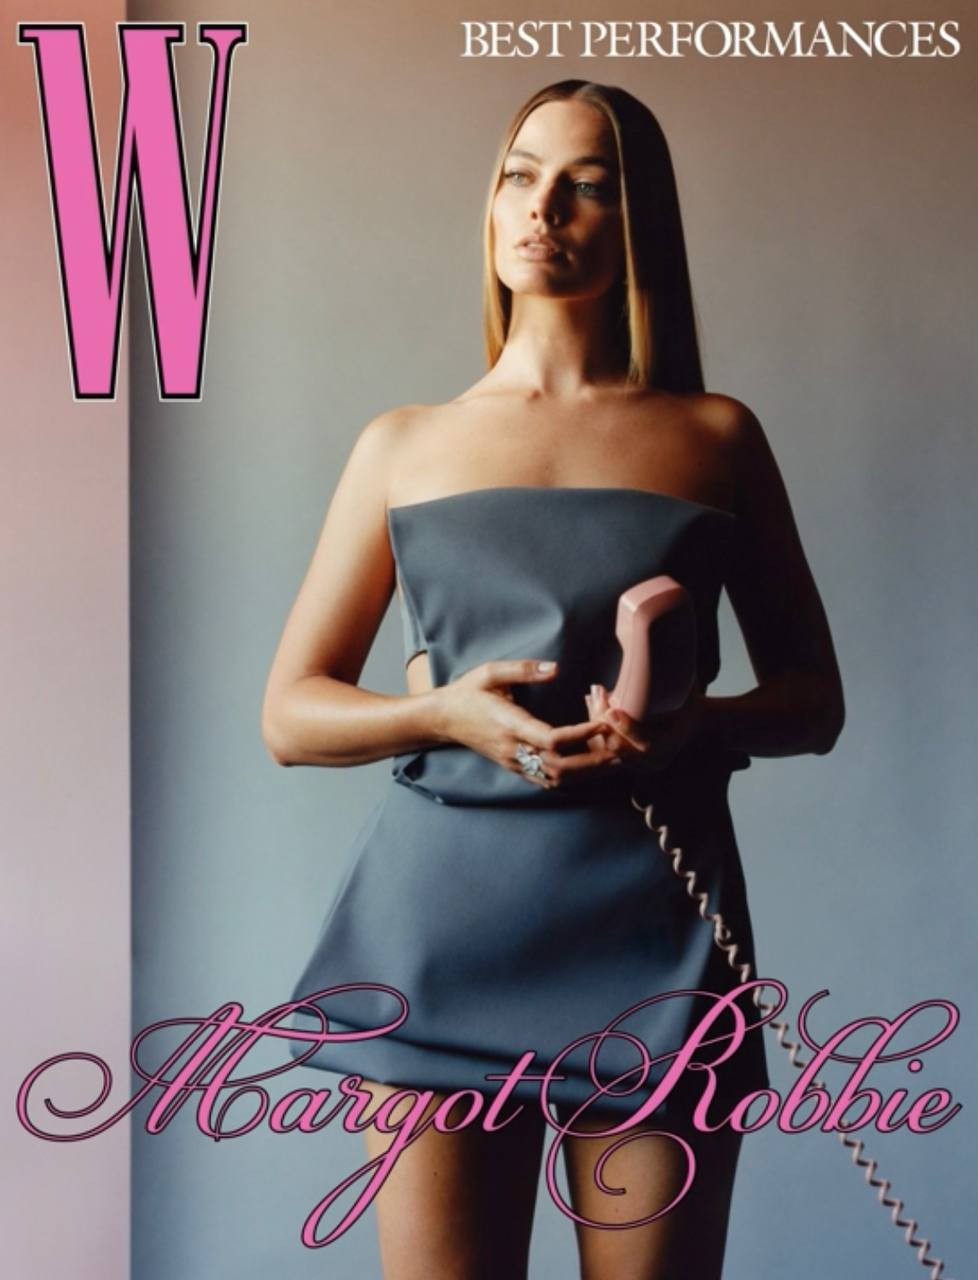 Step into the glitz and glamour of Hollywood with the latest issue of W Magazine featuring some of the biggest stars in the industry. From Brad Pitt to Daniel Craig, the magazine showcases a wide array of talented celebrities. However, it was Margot Robbie who stole the show with her stunning photos in tights and a short skirt. Don't miss out on the excitement and buzz surrounding this year's Best Performance issue.